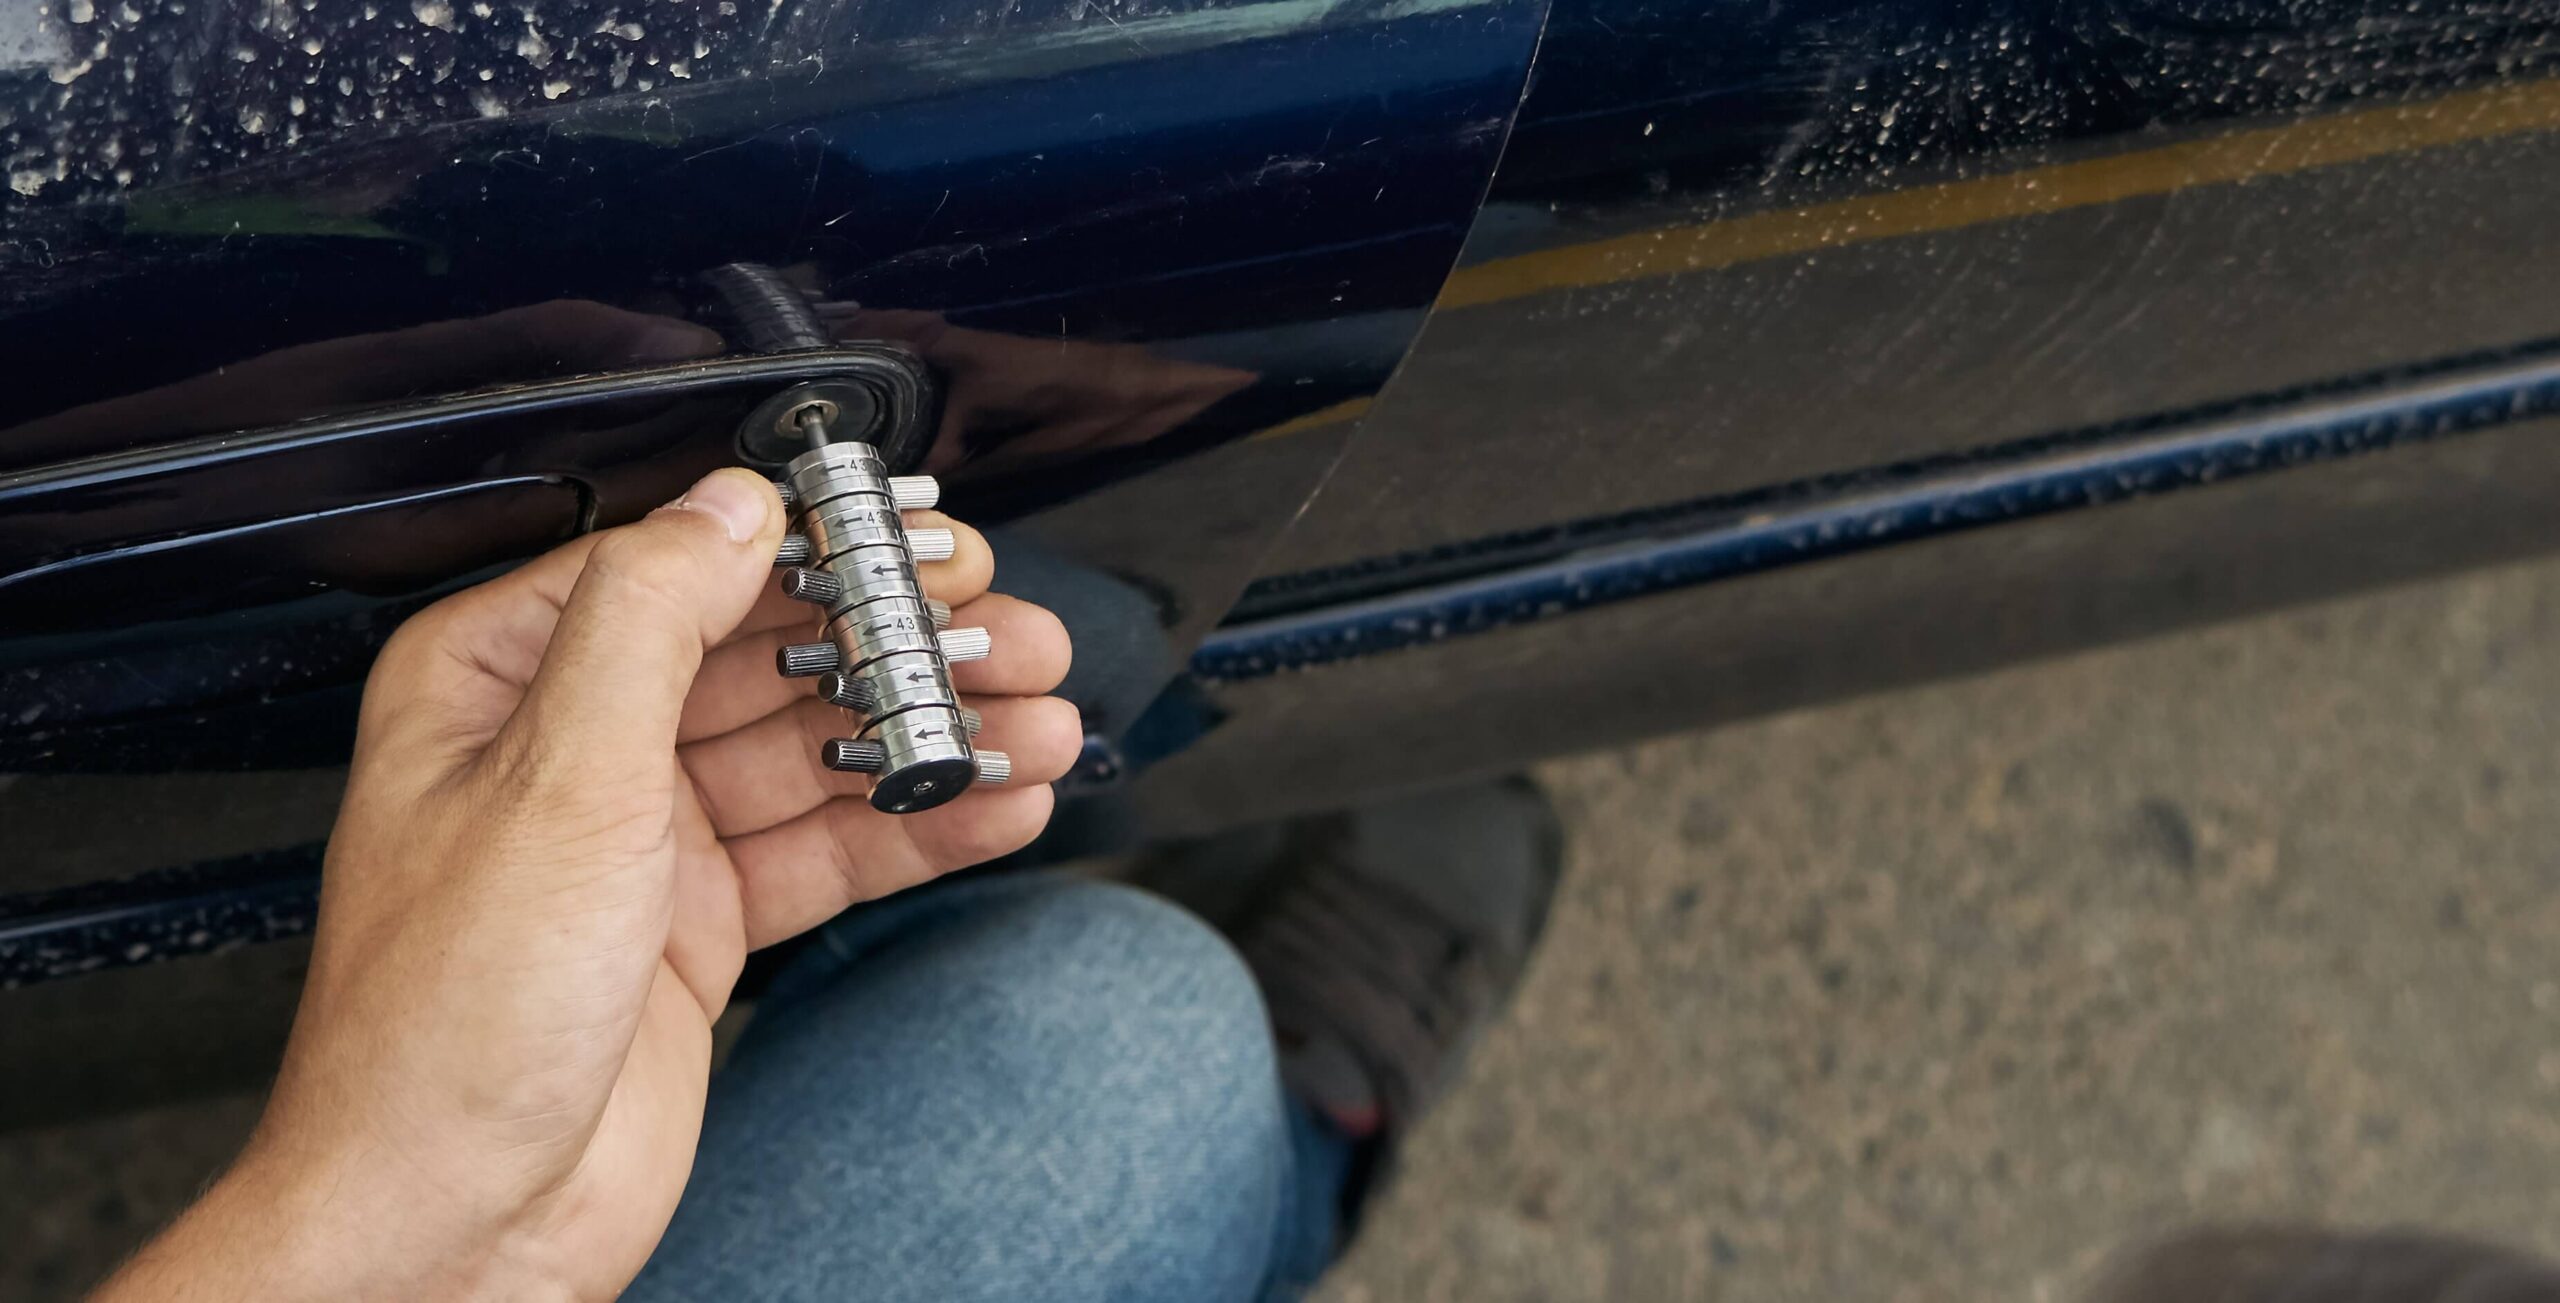 Locksmith performing a car lockout service using a tool to open a car door.